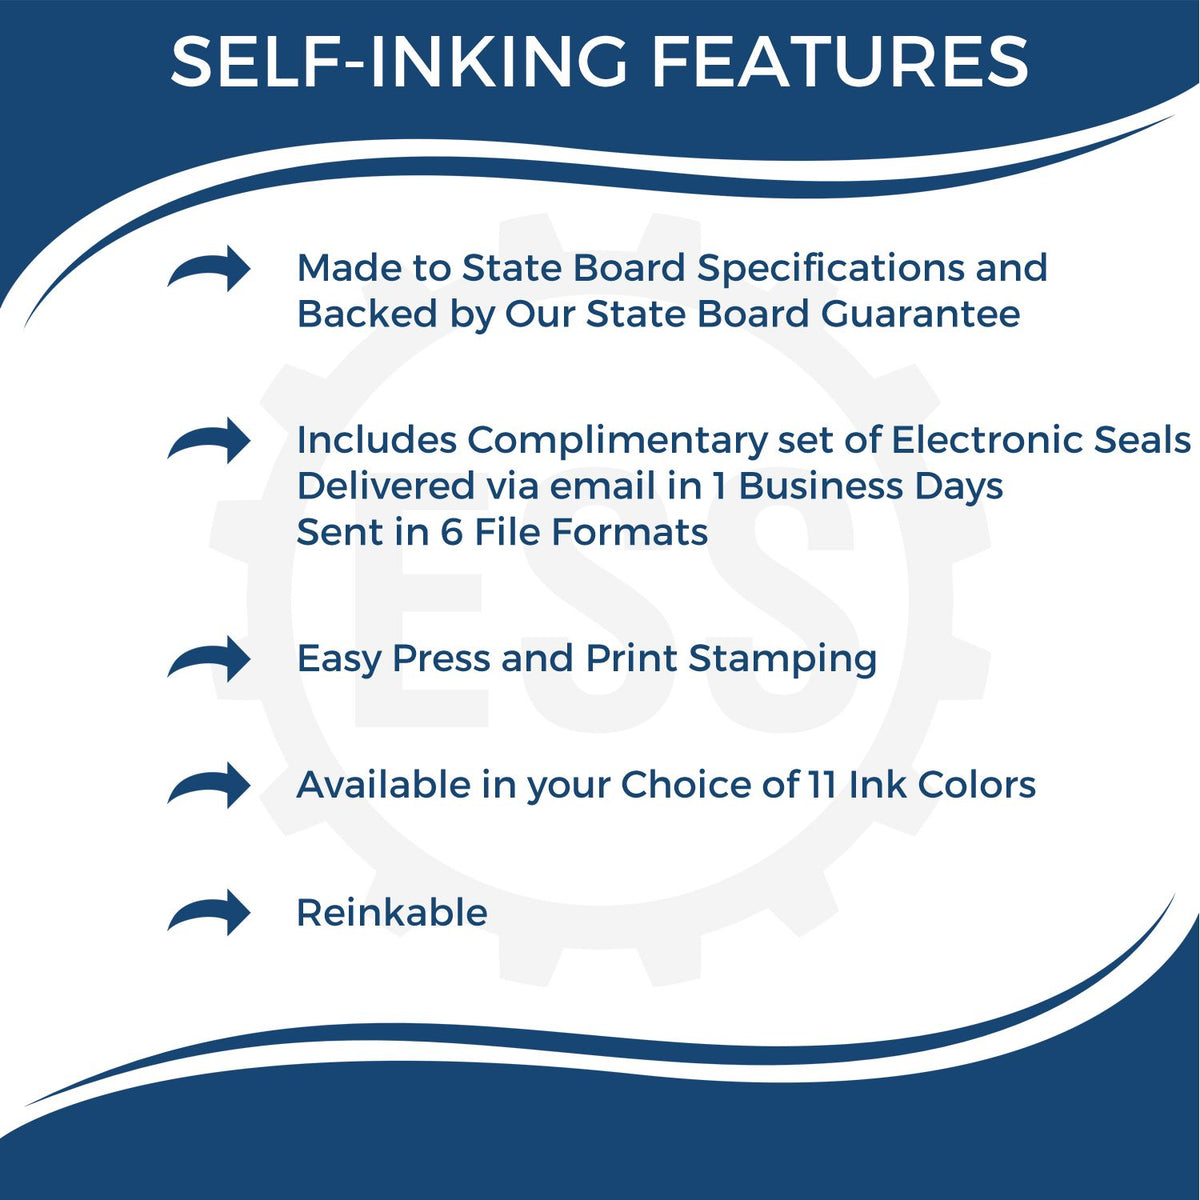 A picture of an infographic highlighting the selling points for the Self-Inking New York Geologist Stamp